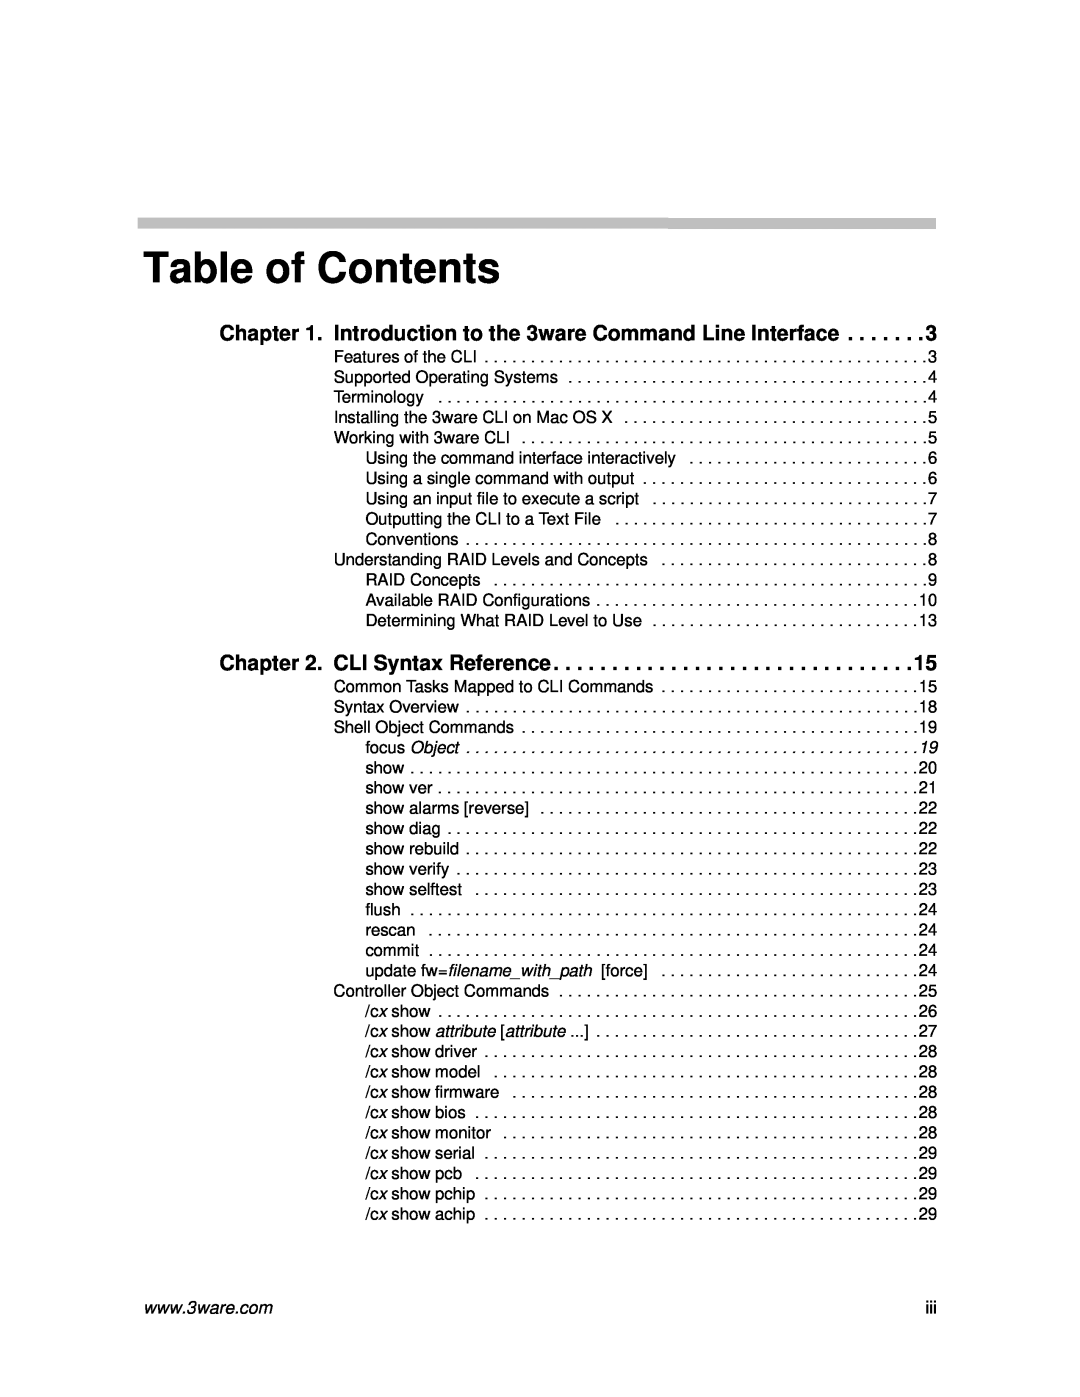 AMCC 9590SE-4ME manual Introduction to the 3ware Command Line Interface, CLI Syntax Reference, Table of Contents 